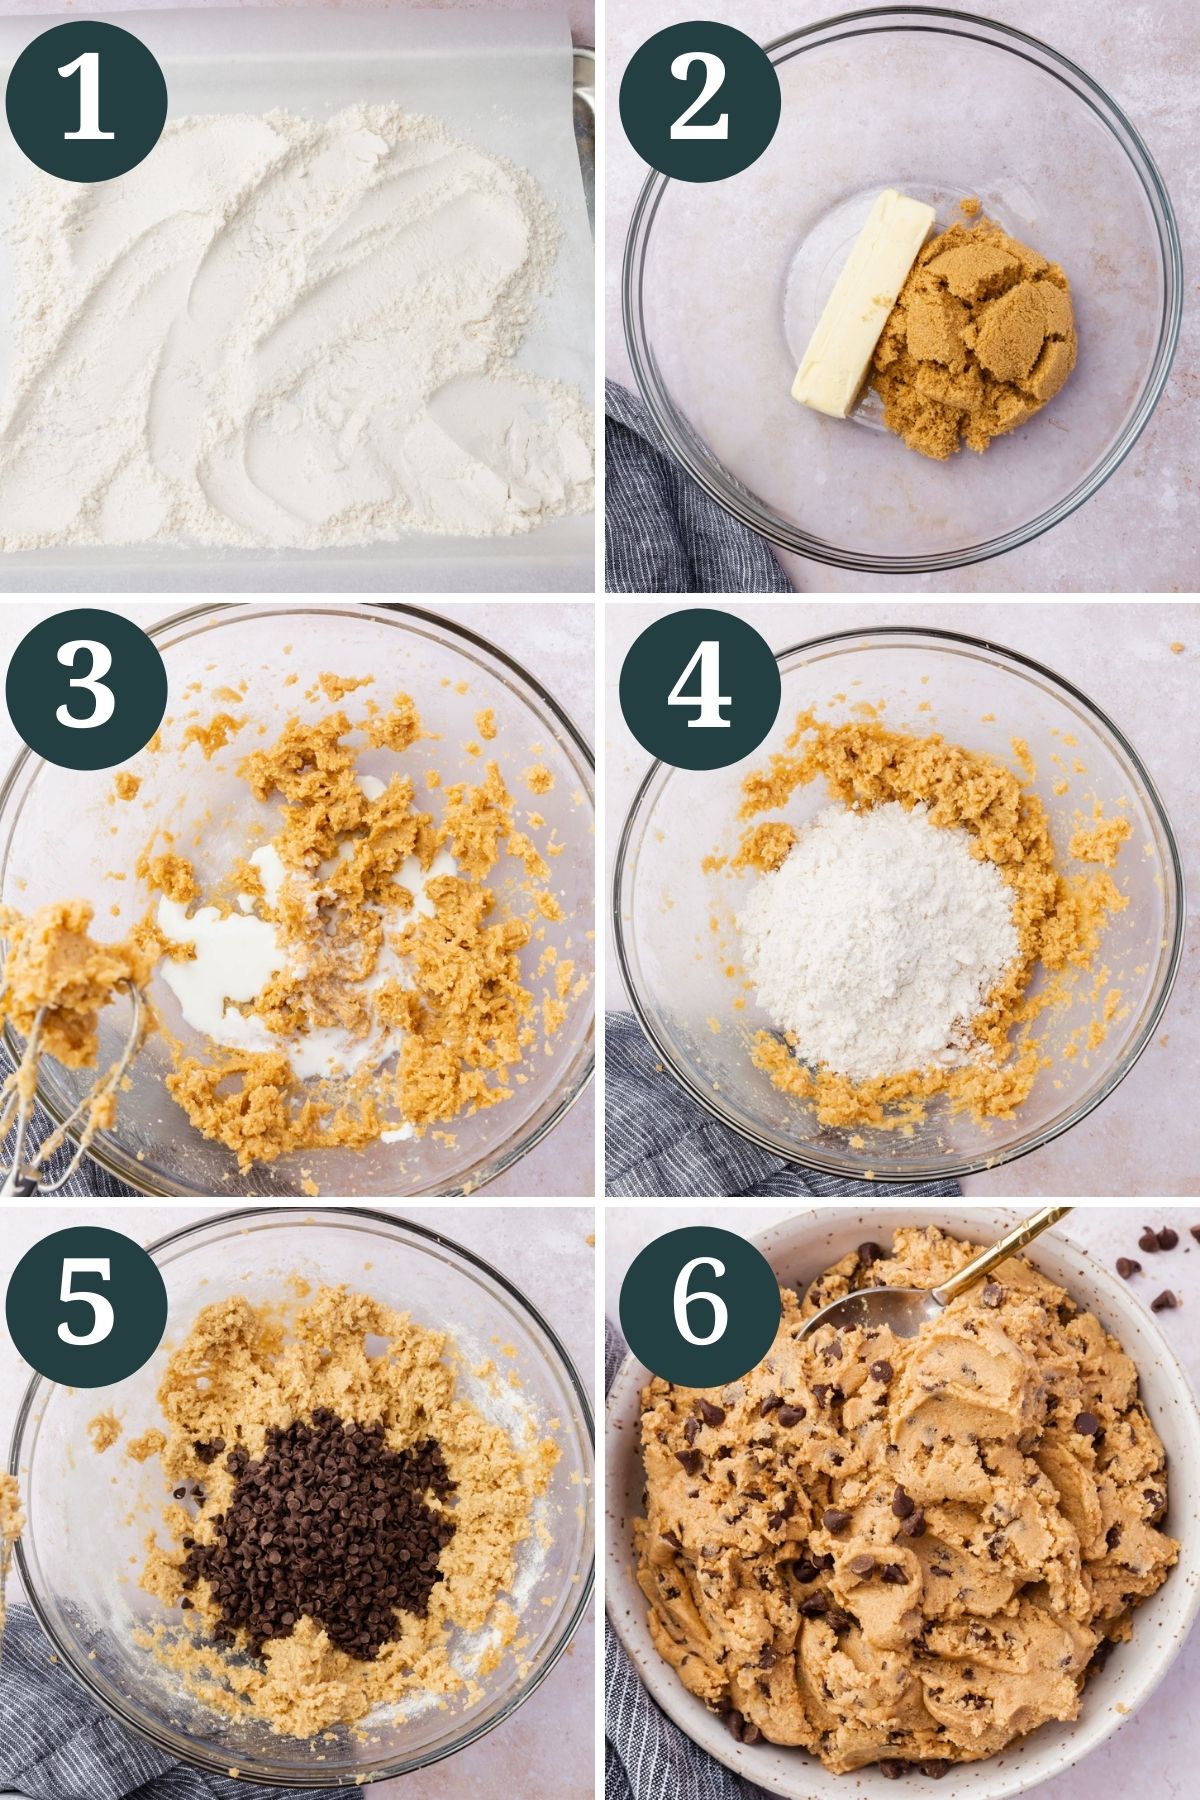 Steps 1-6 for making gluten-free edible cookie dough.